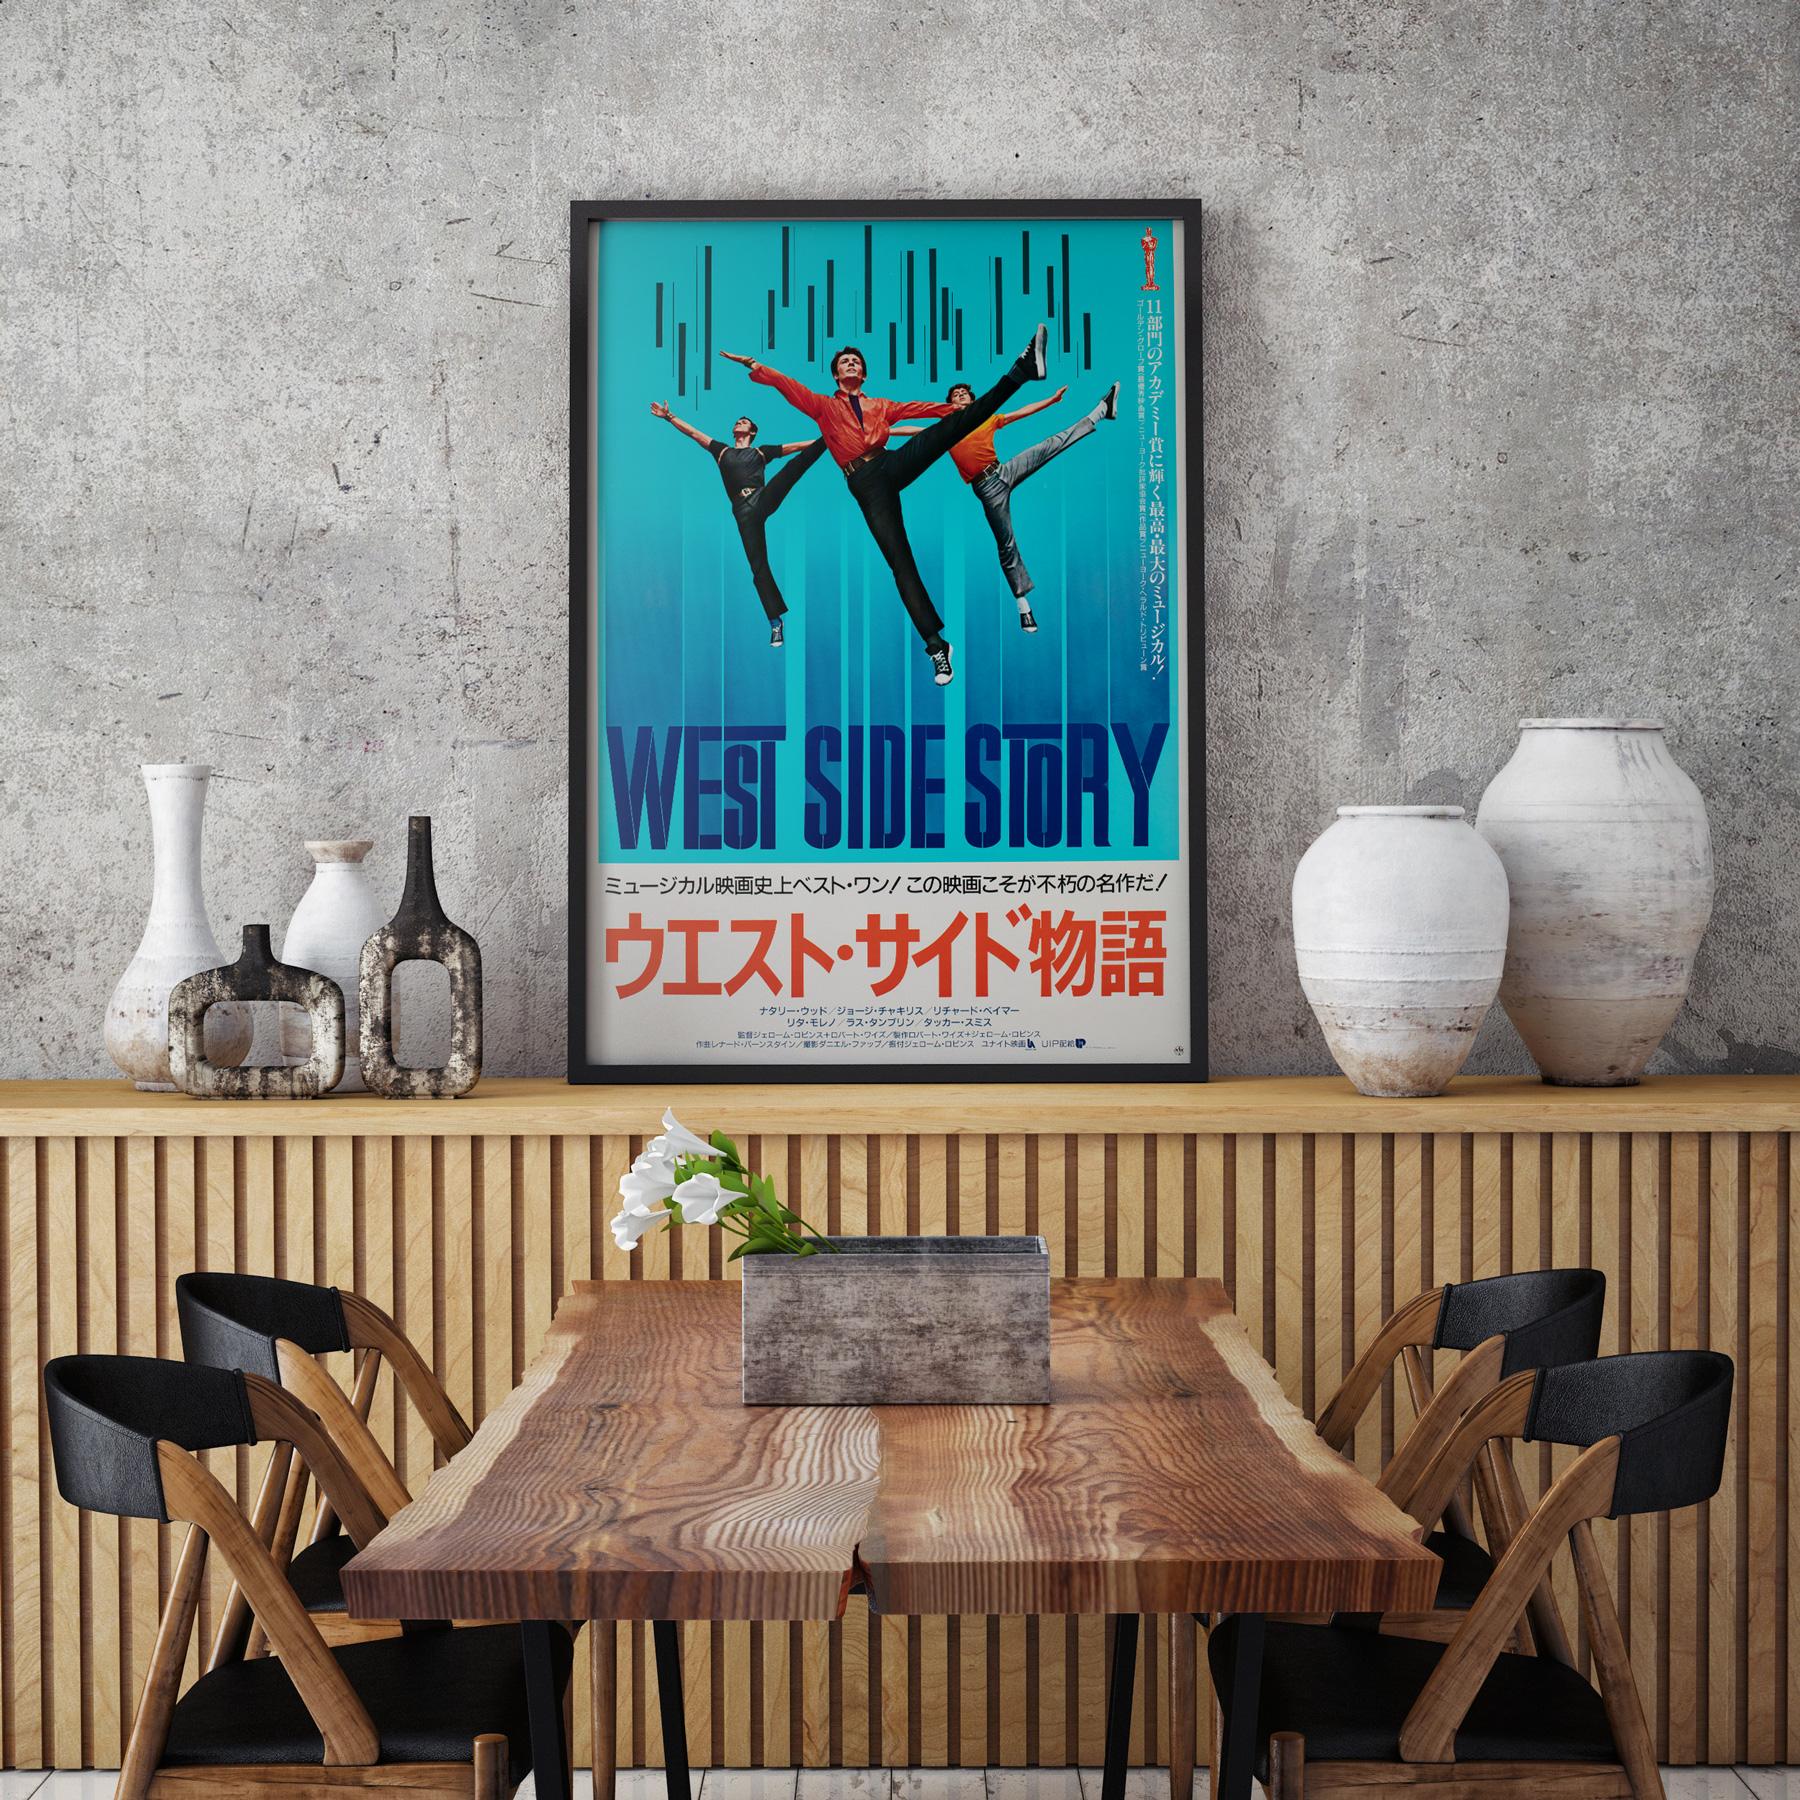 The original 1992 re-release Japanese poster for much loved classic West Side Story. Fab colours and styling.

This vintage movie poster is sized 20 1/4 x 28 5/8 inches. It will be sent rolled (unframed).

Year R1992
Poster Type JPN B2 
Style